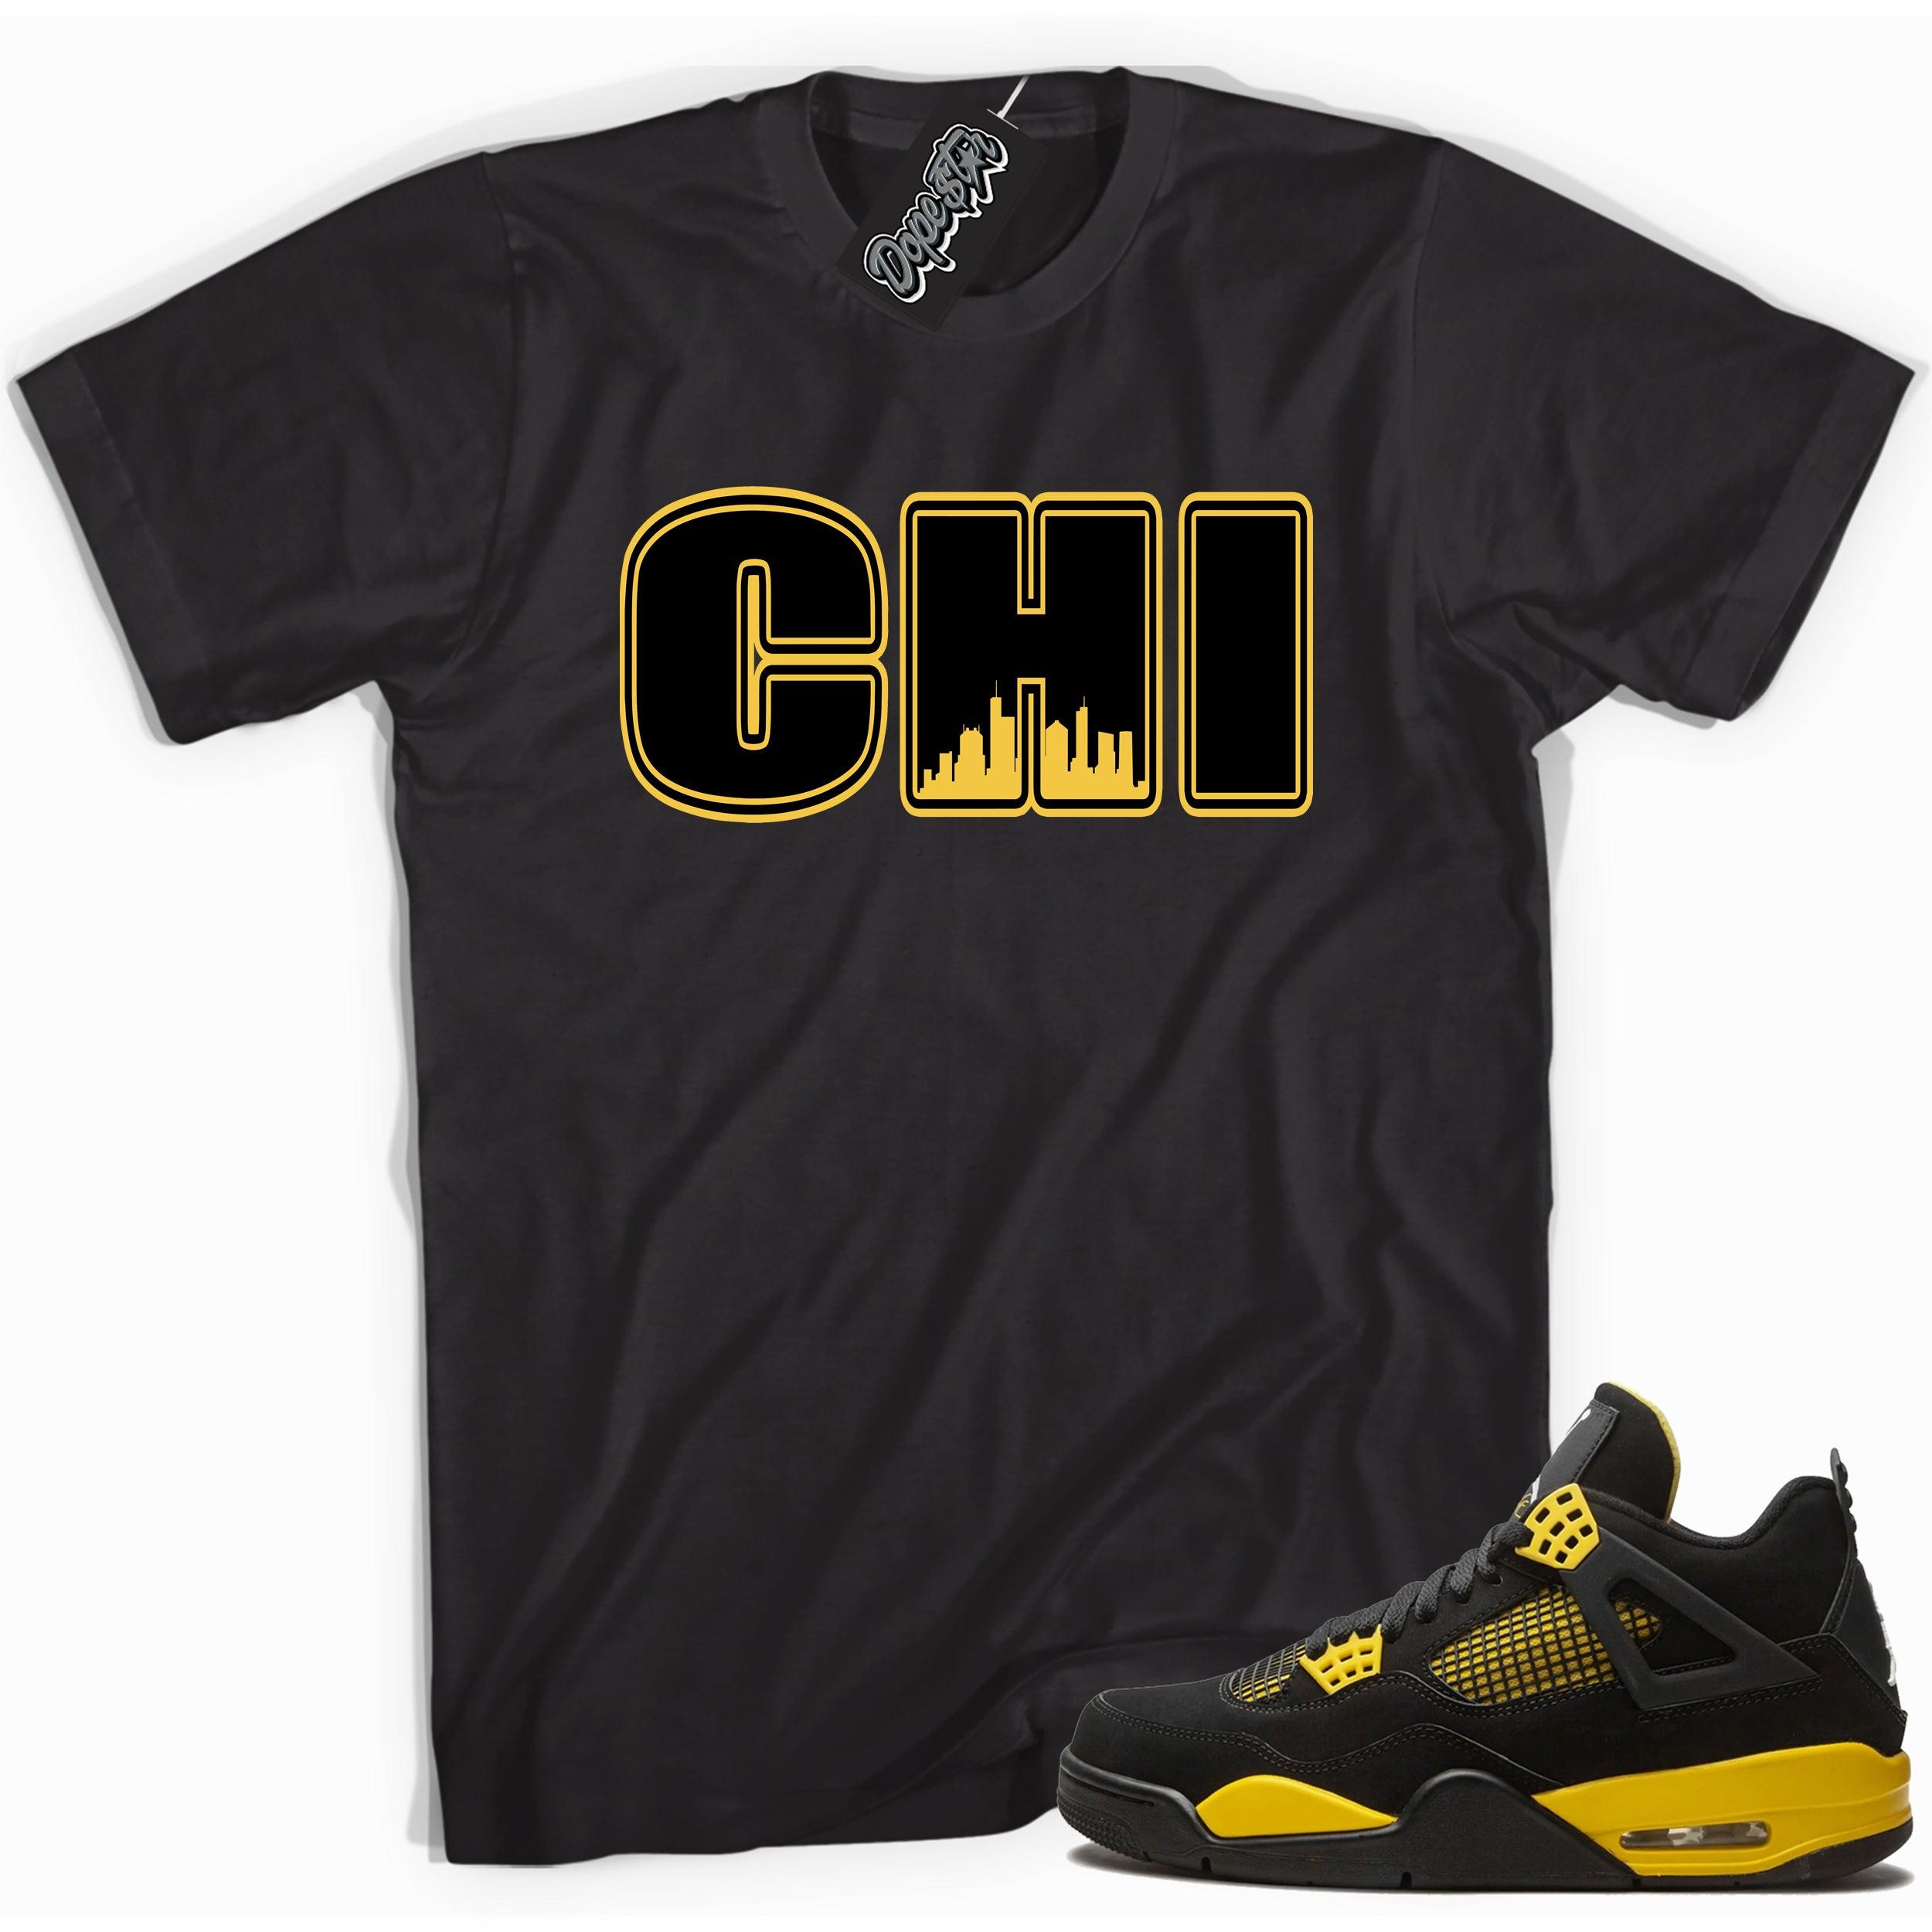 Cool black graphic tee with 'chicago' print, that perfectly matches  Air Jordan 4 Thunder sneakers